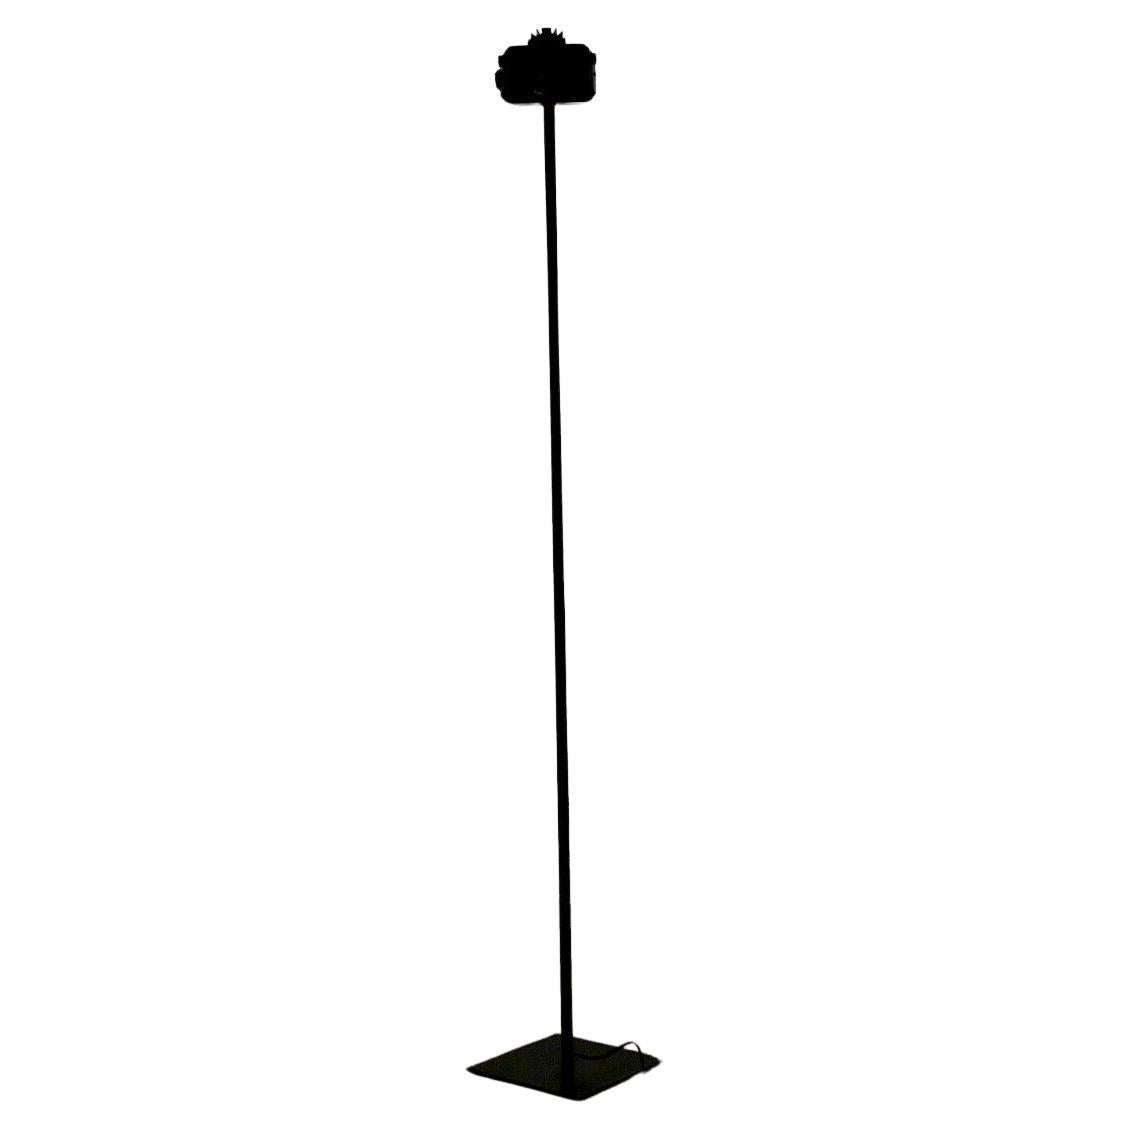 A minimal and radical adjustable floor lamp, Post-Modernist, Bauhaus, Constructivist, Memphis, square black lacquered metal base with 